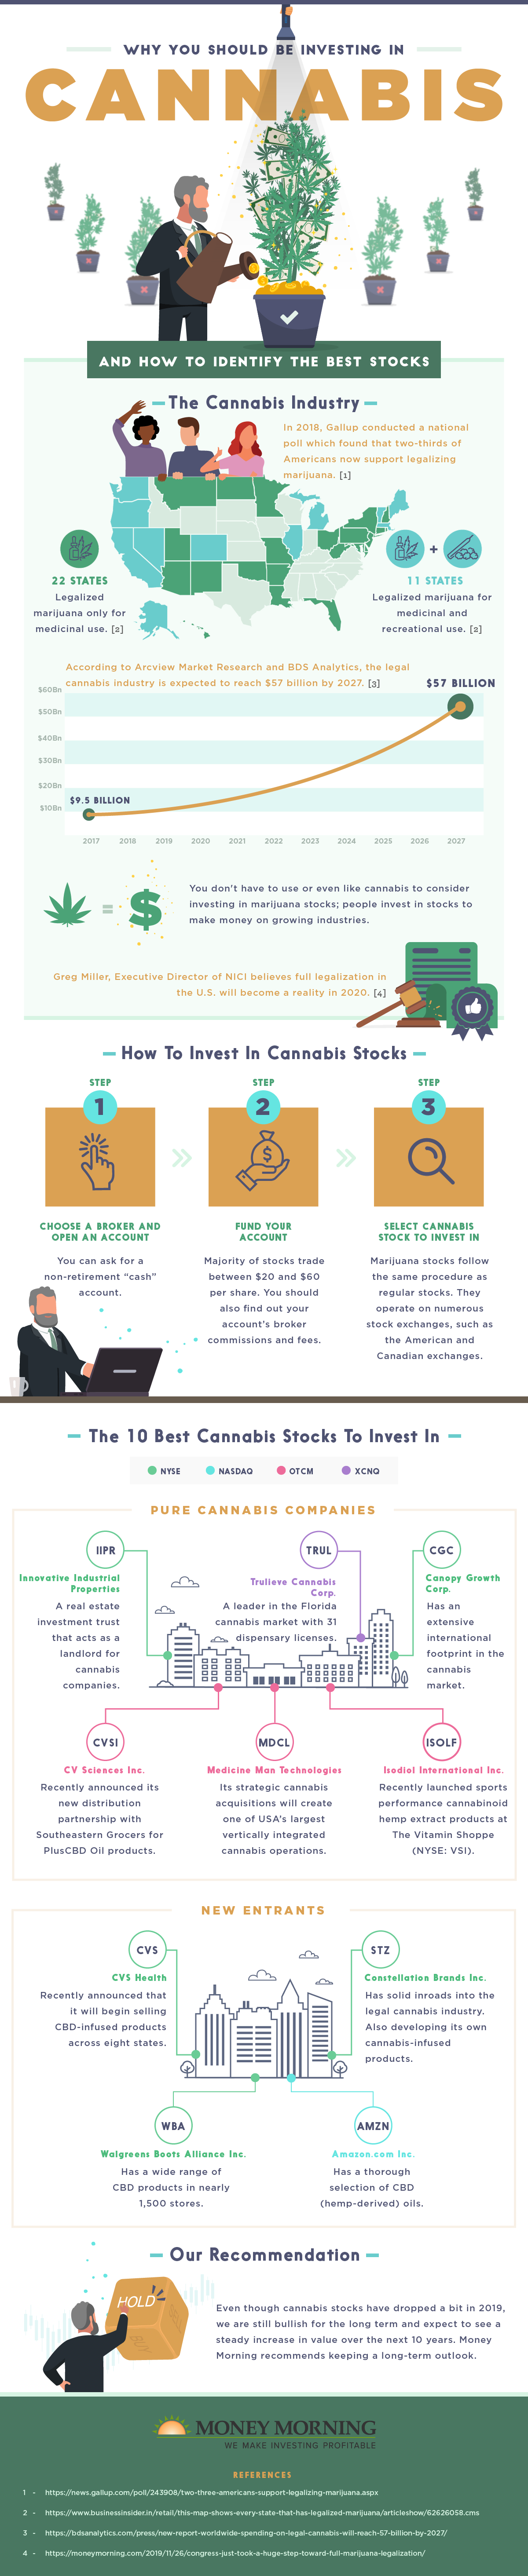 5 Books To Read Before Investing In Cannabis